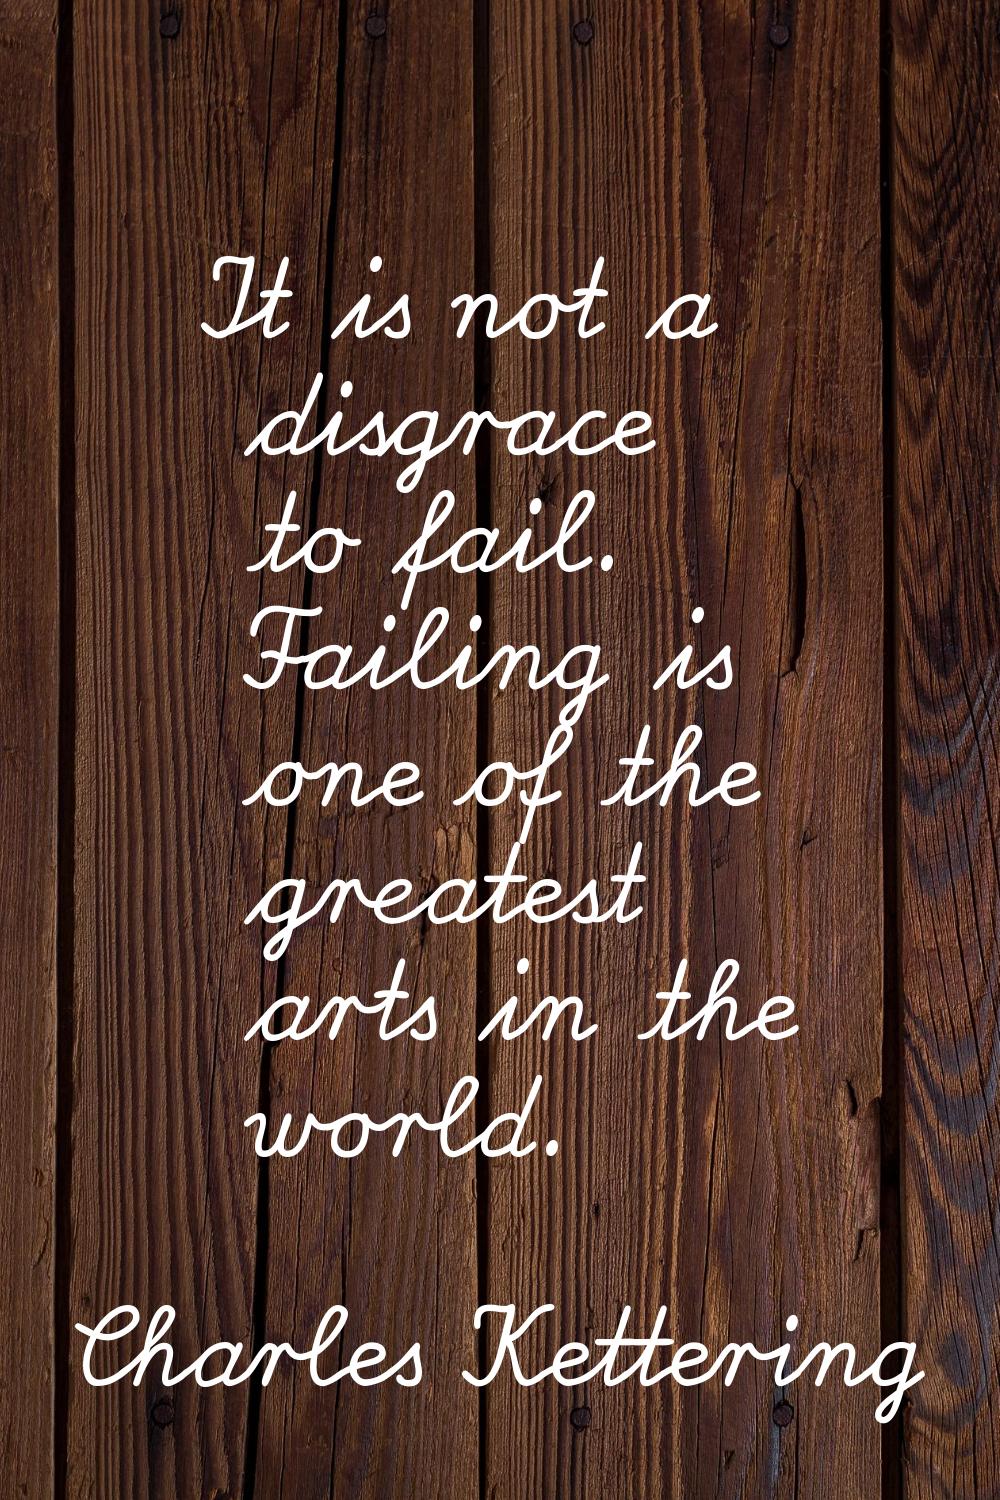 It is not a disgrace to fail. Failing is one of the greatest arts in the world.